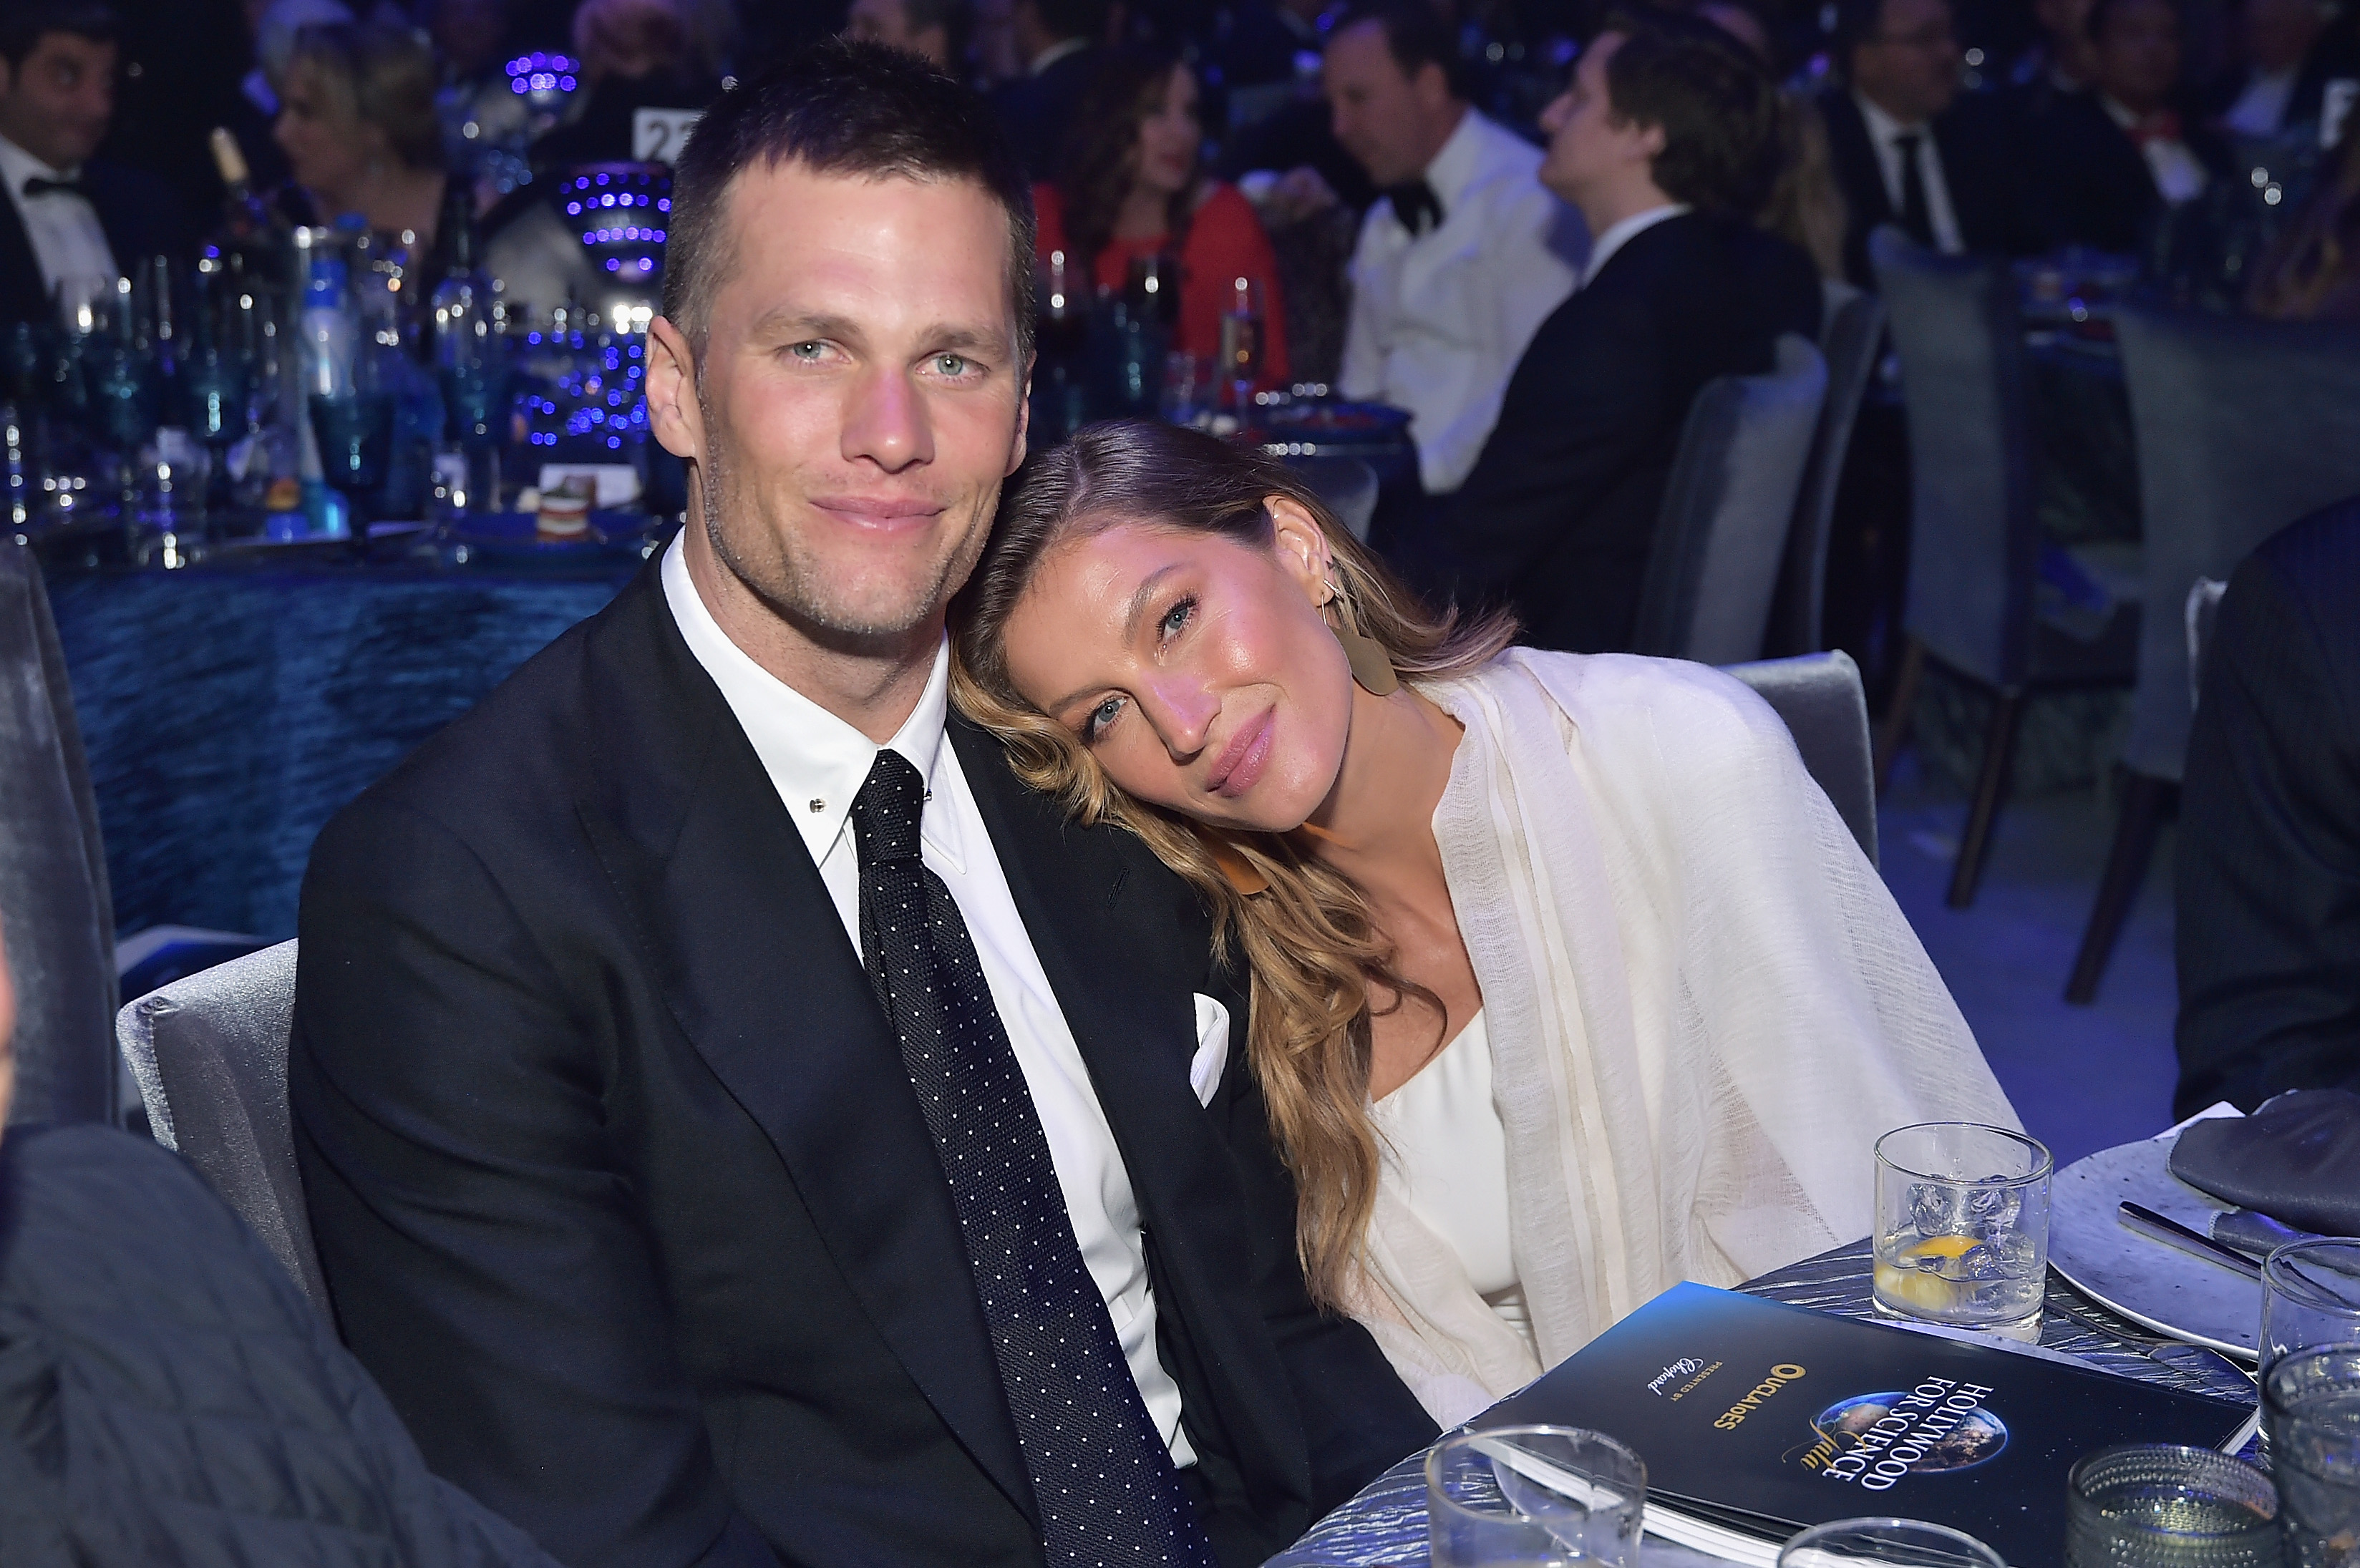 Tom Brady and Gisele Bündchen at UCLA IoES honors Barbra Streisand and Gisele Bundchen in Beverly Hills, 2019 | Source: Getty Images